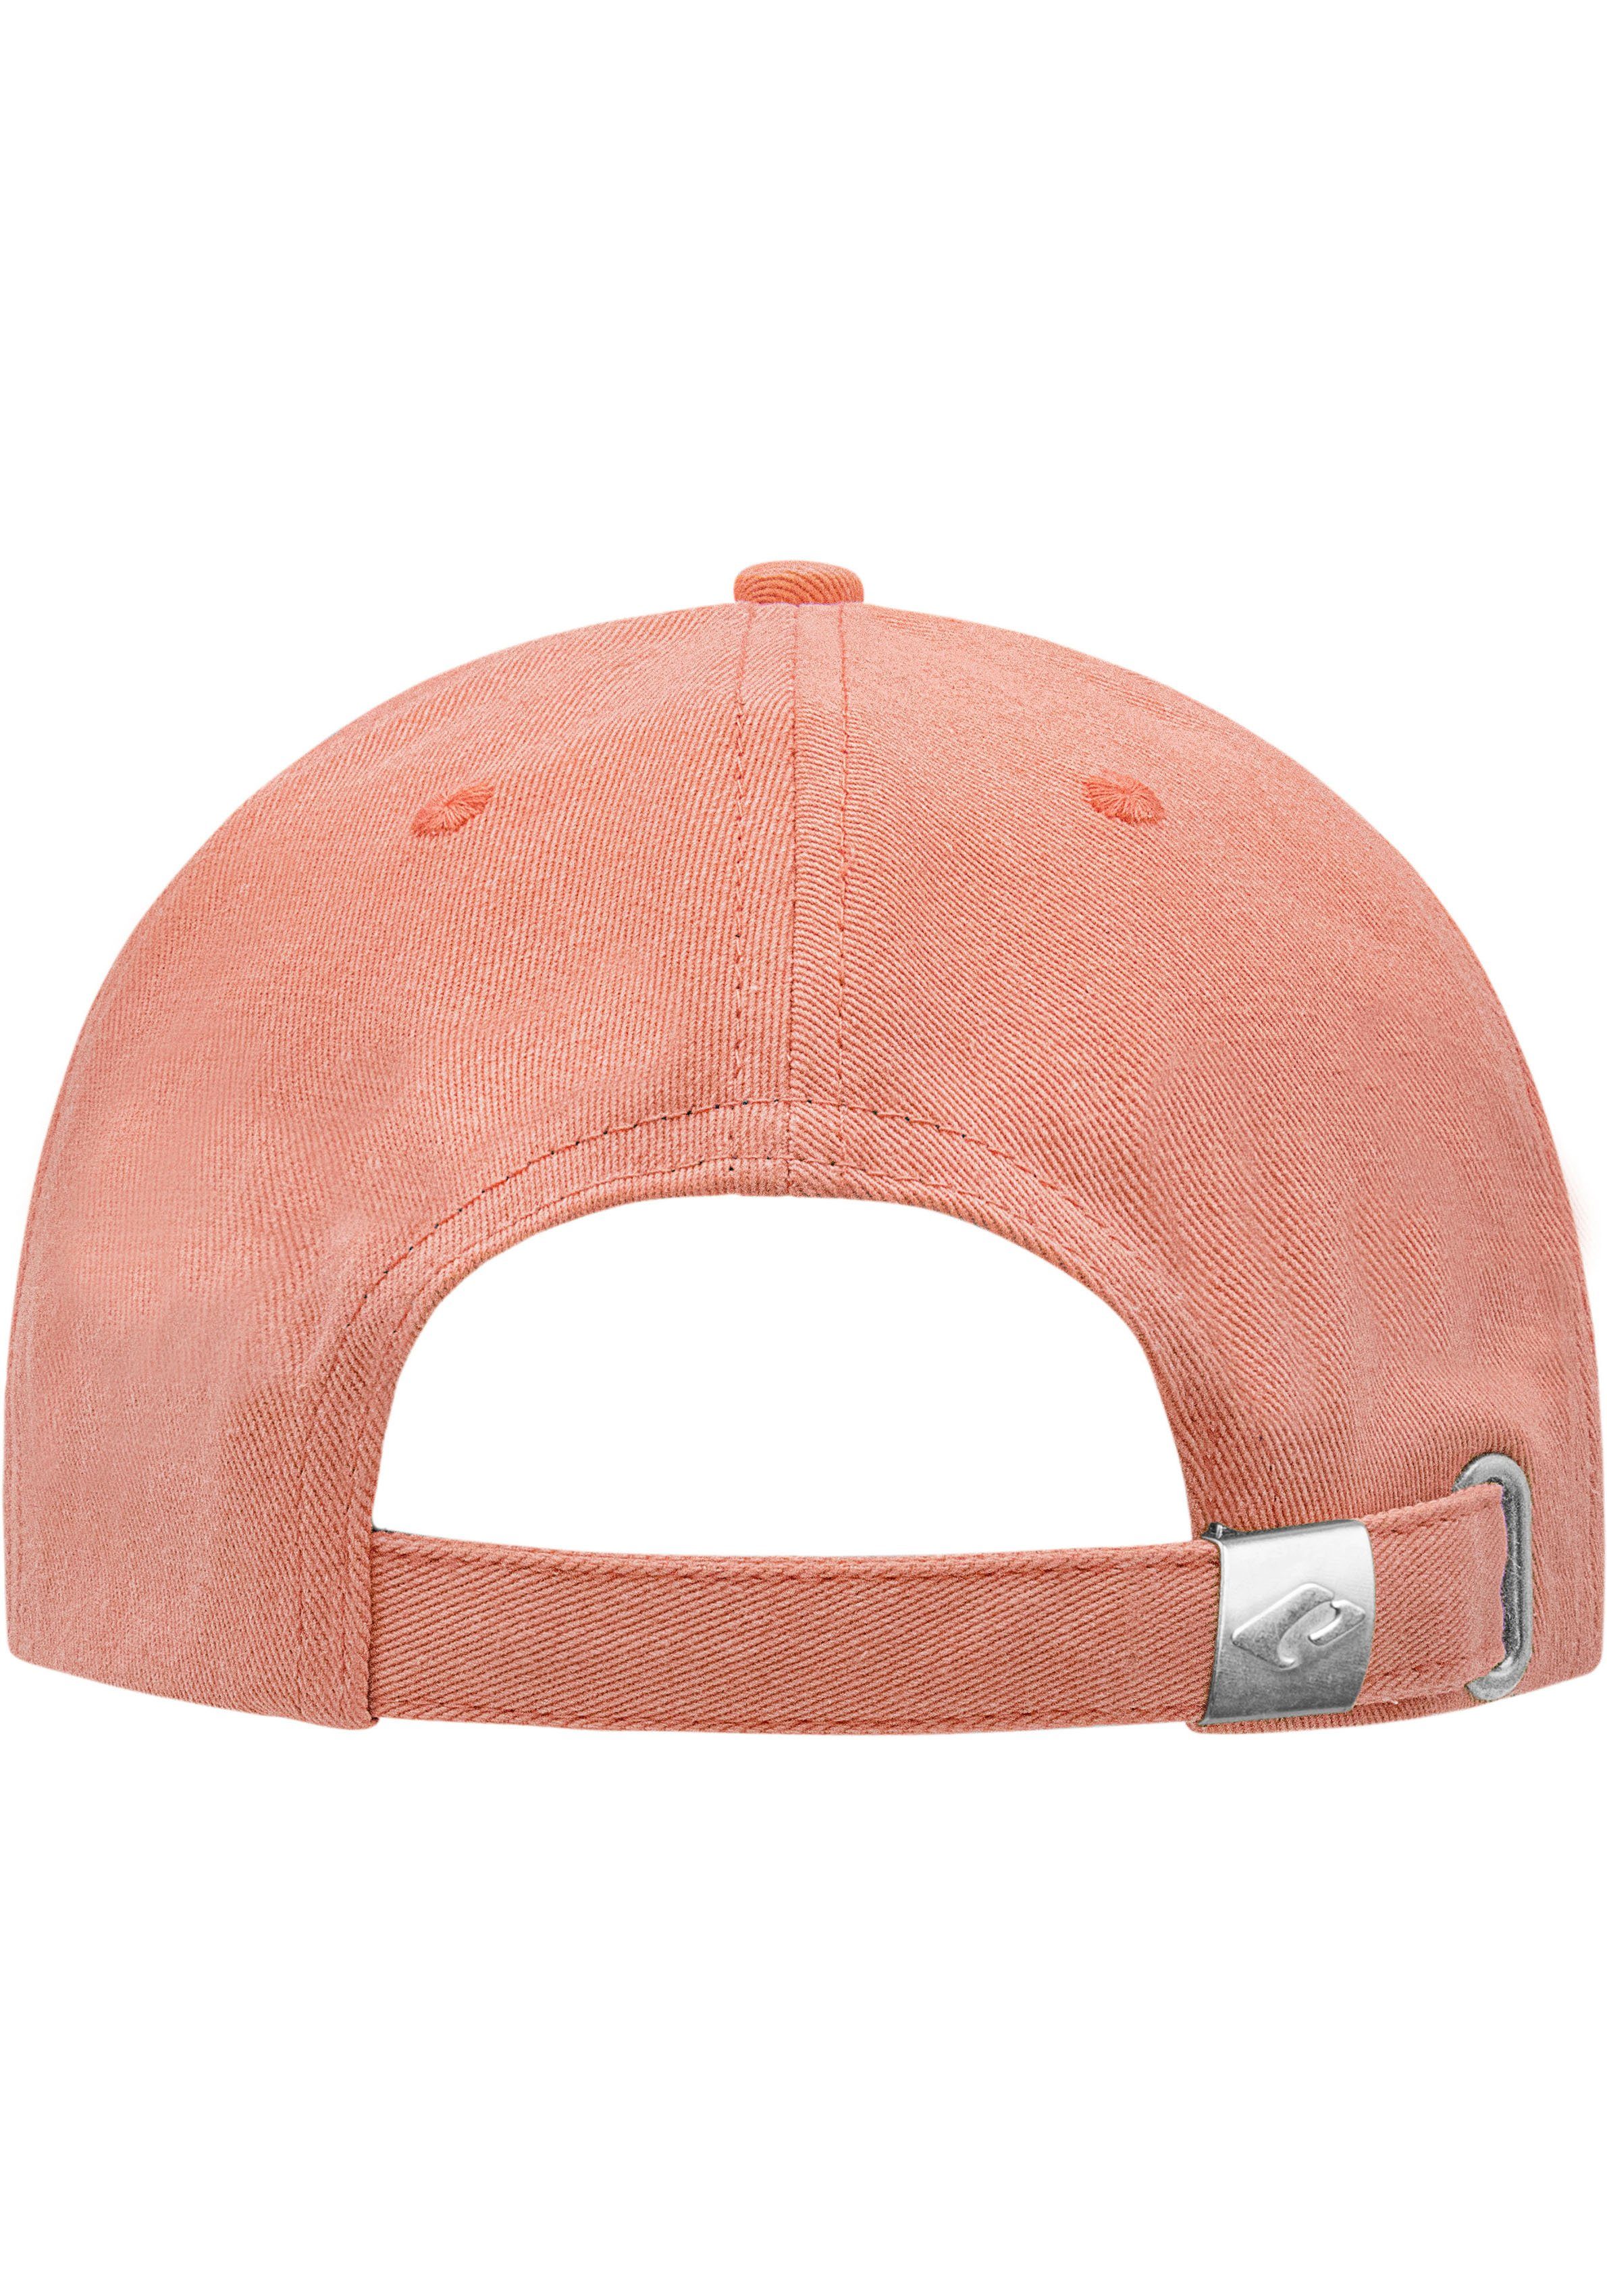 Baseball chillouts Hat Cap Arklow coral